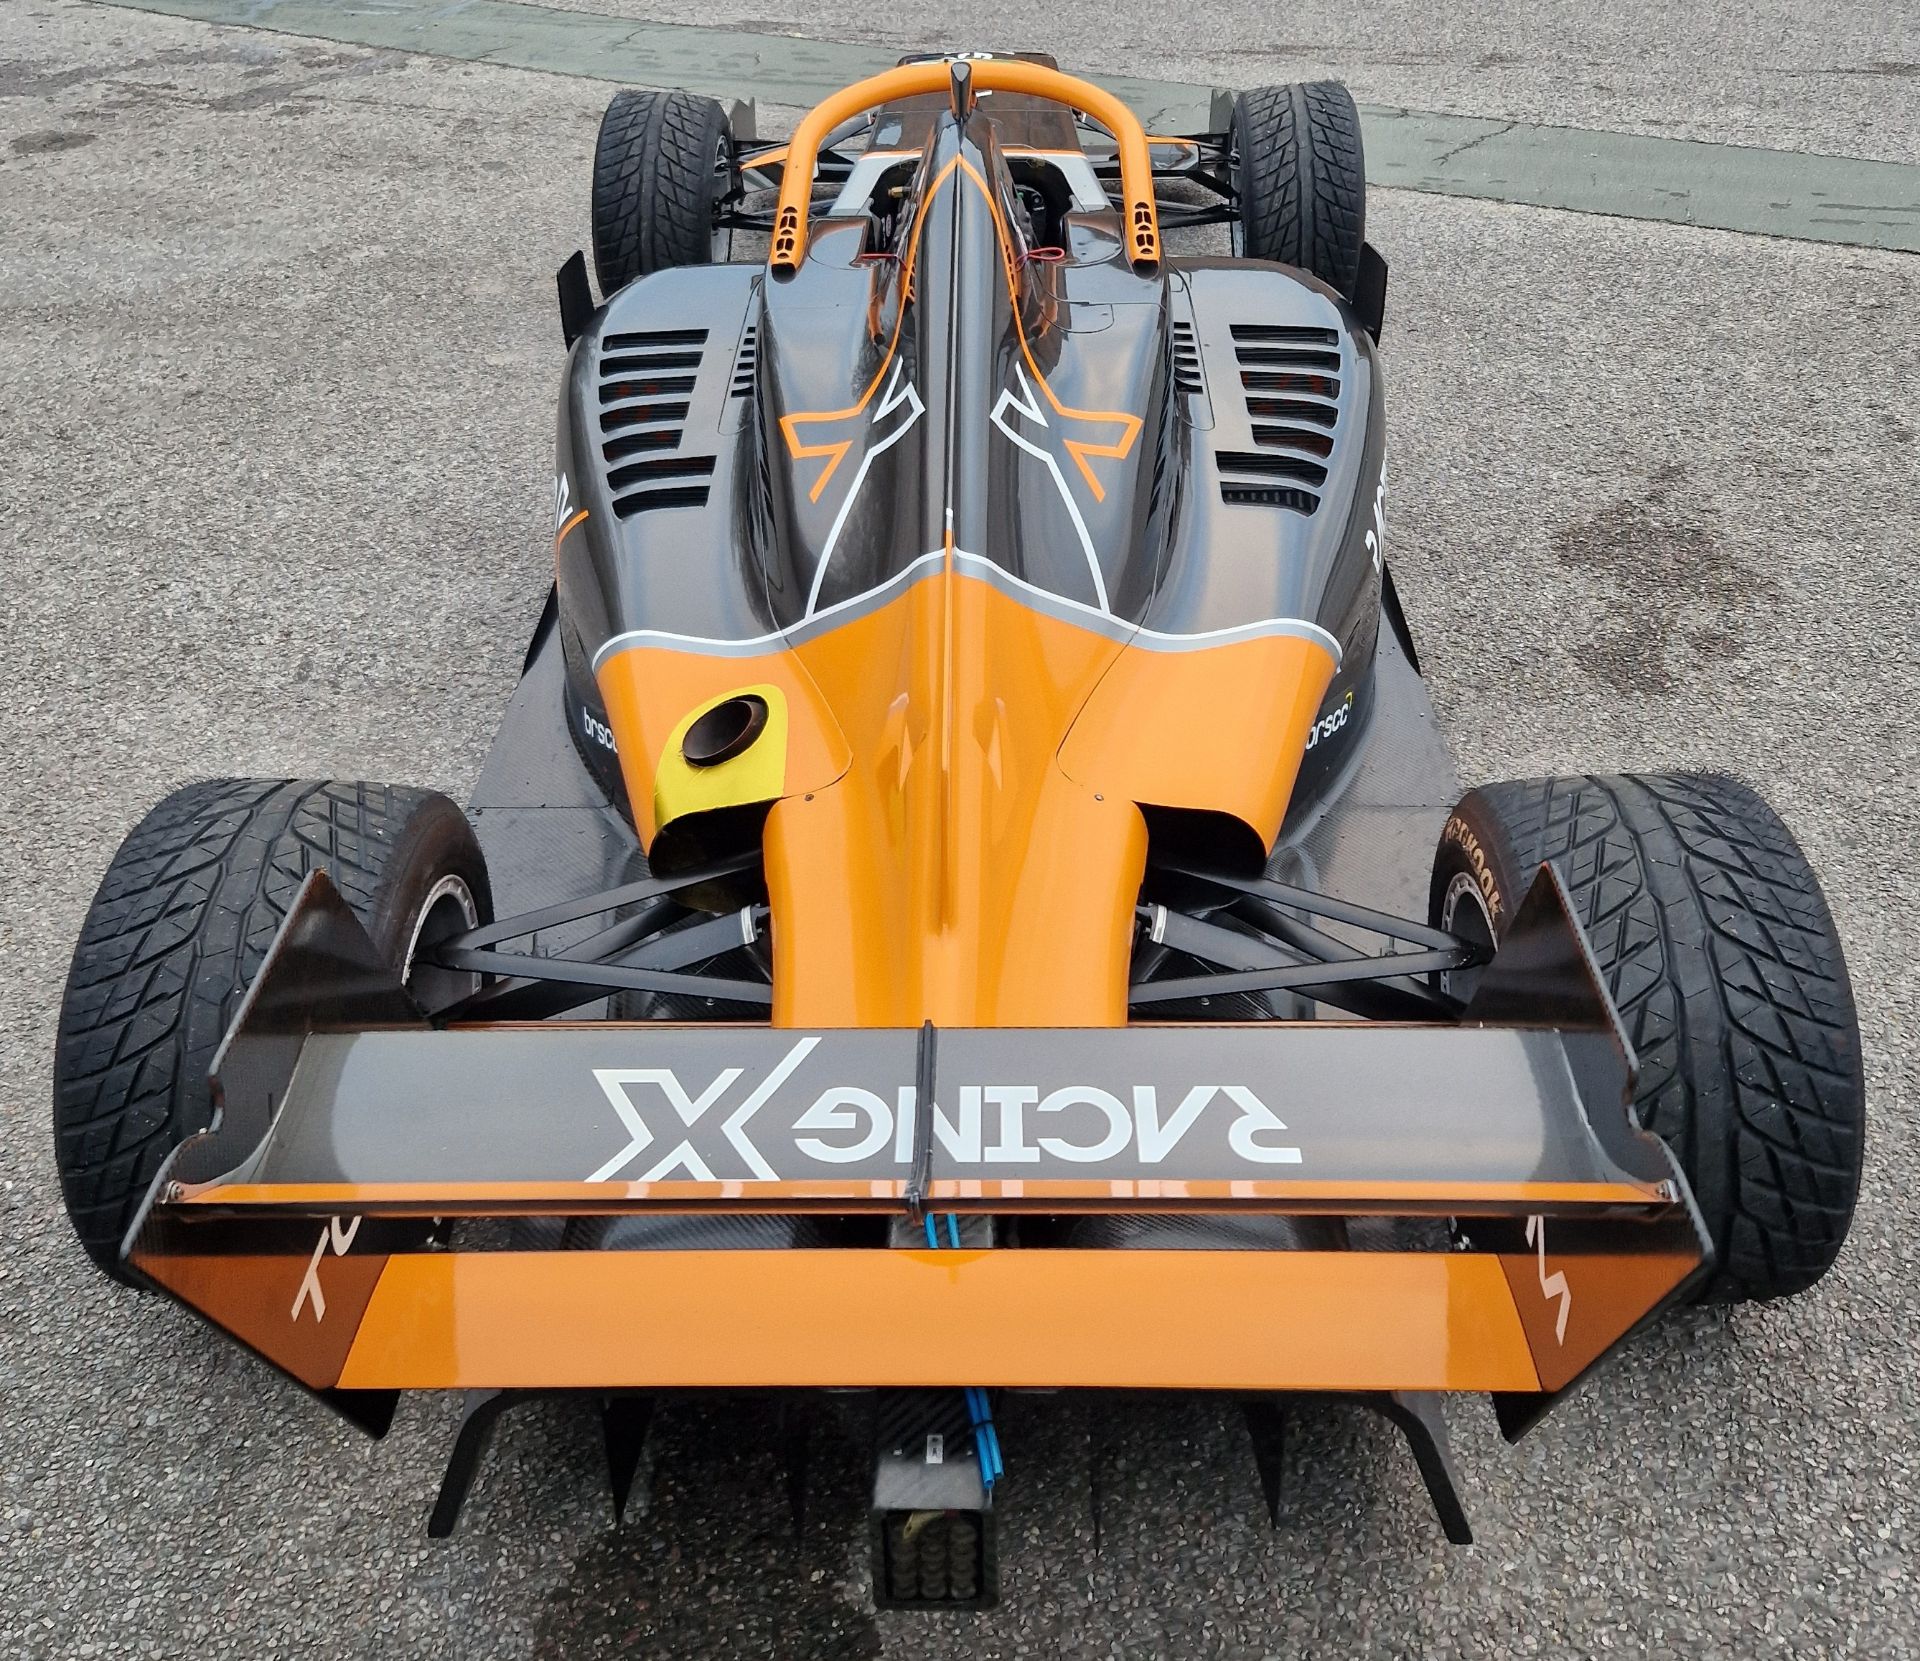 One TATUUS F3 T-318 Alfa Romeo Race Car Chassis No. 063 (2019) Finished in RACING X Livery as Driven - Image 4 of 10